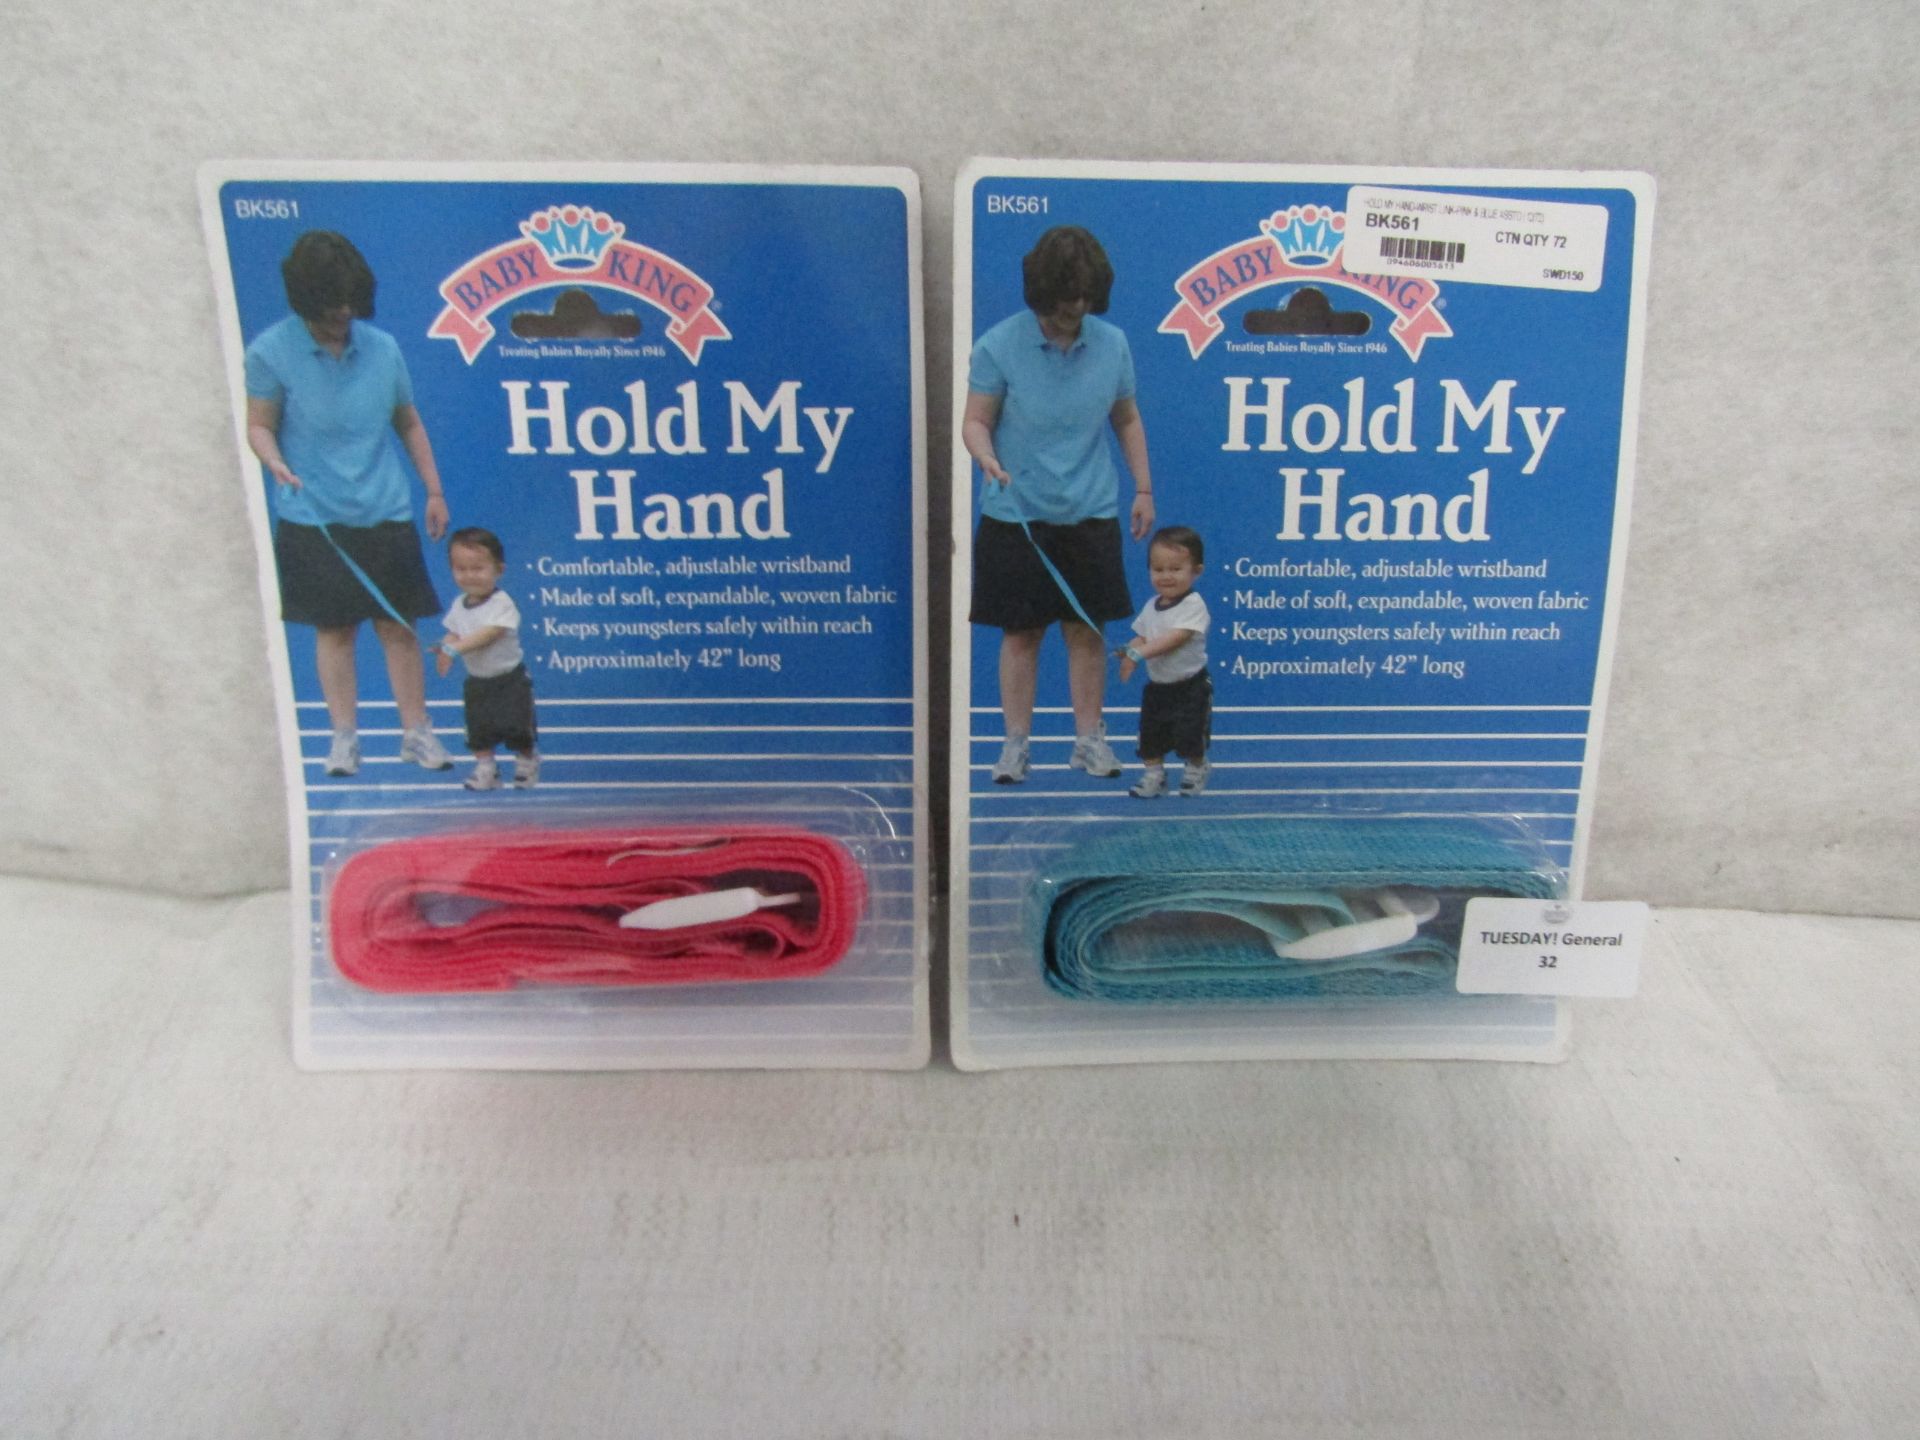 2X Baby King - Hold My Hand Baby Wrist-Link 42" Long Approx ( 1X BLUE 1X PINK ) - Packaged.